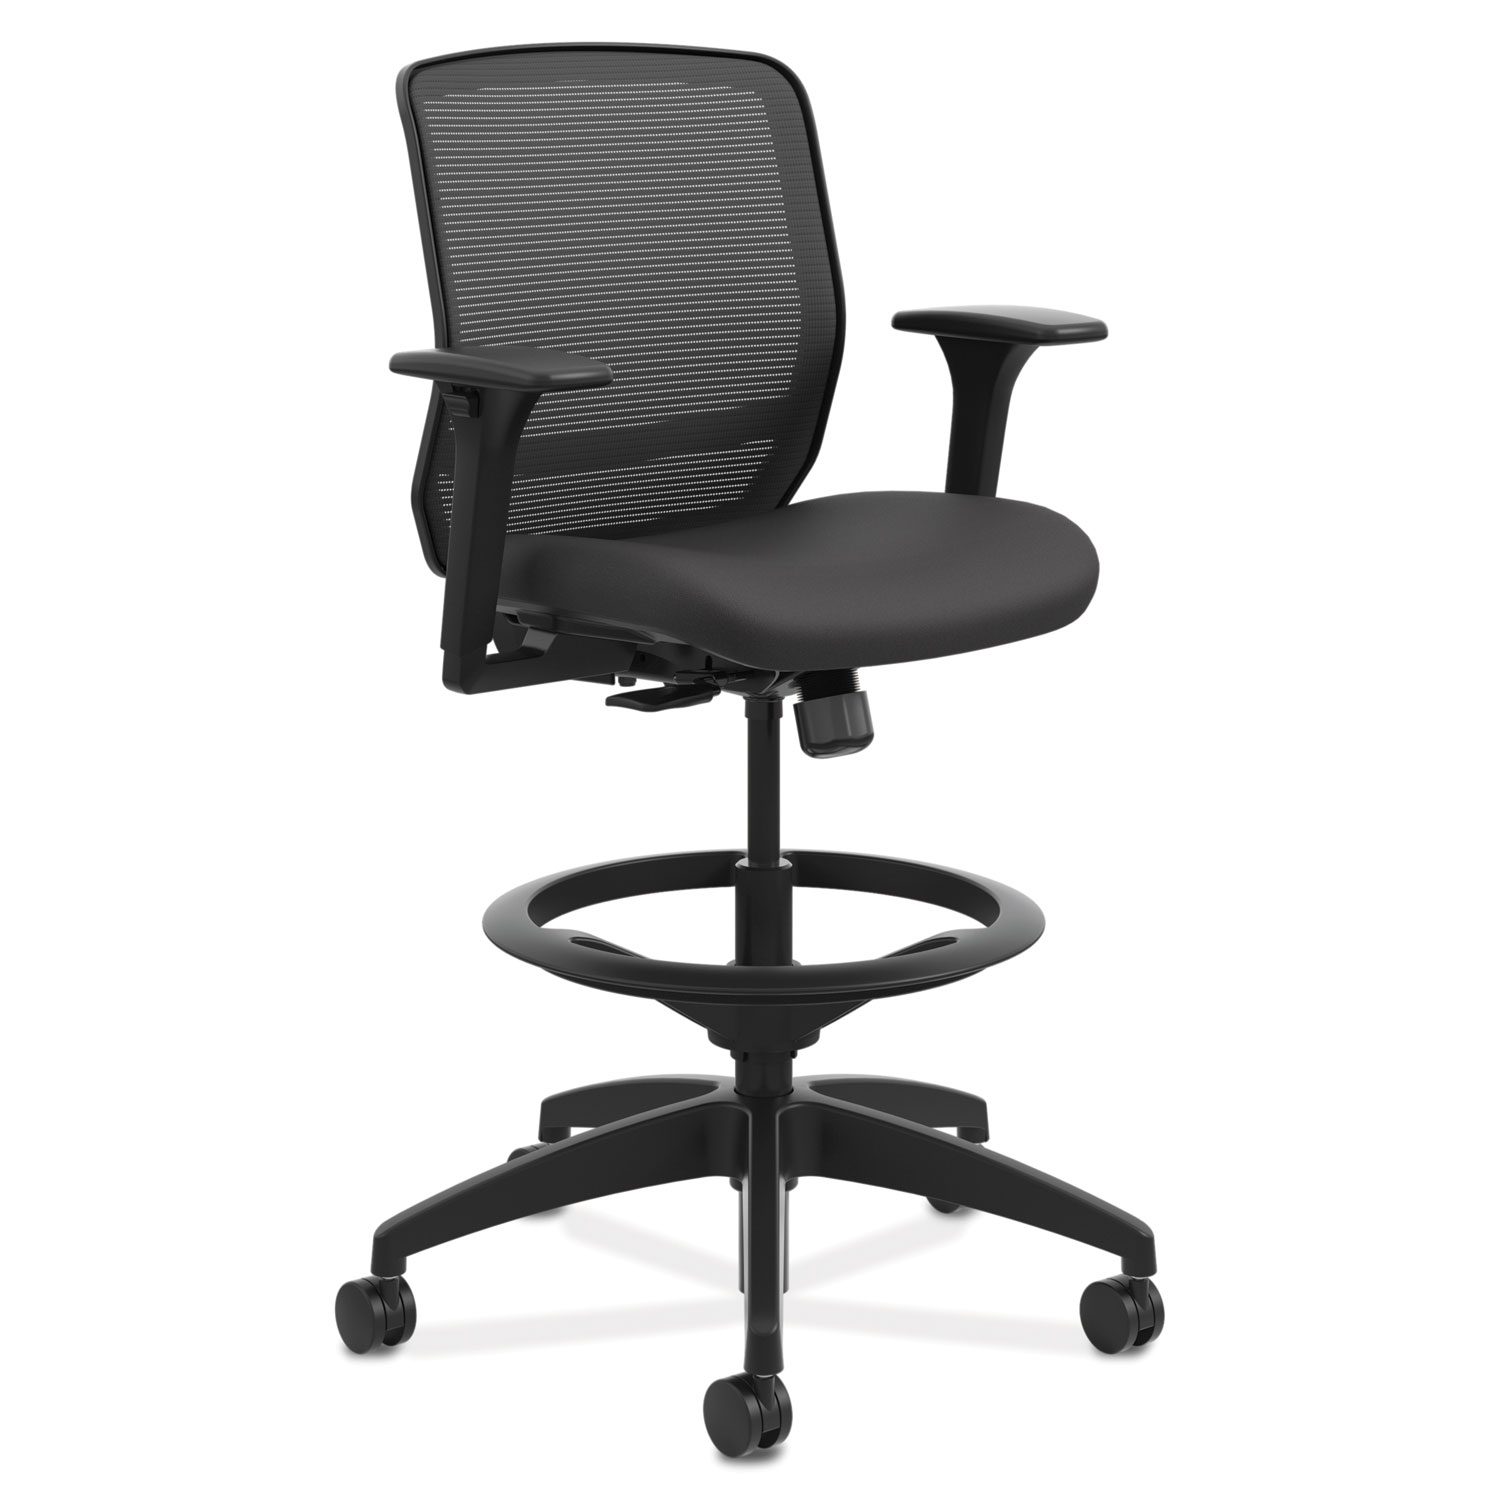  HON HQTSM.Y0.A.H.IM.CU10.SB Quotient Series Mesh Mid-Back Task Stool, 33 Seat Height, Supports up to 300 lbs., Black Seat/Black Back, Black Base (HONQTSMY1ACU10) 